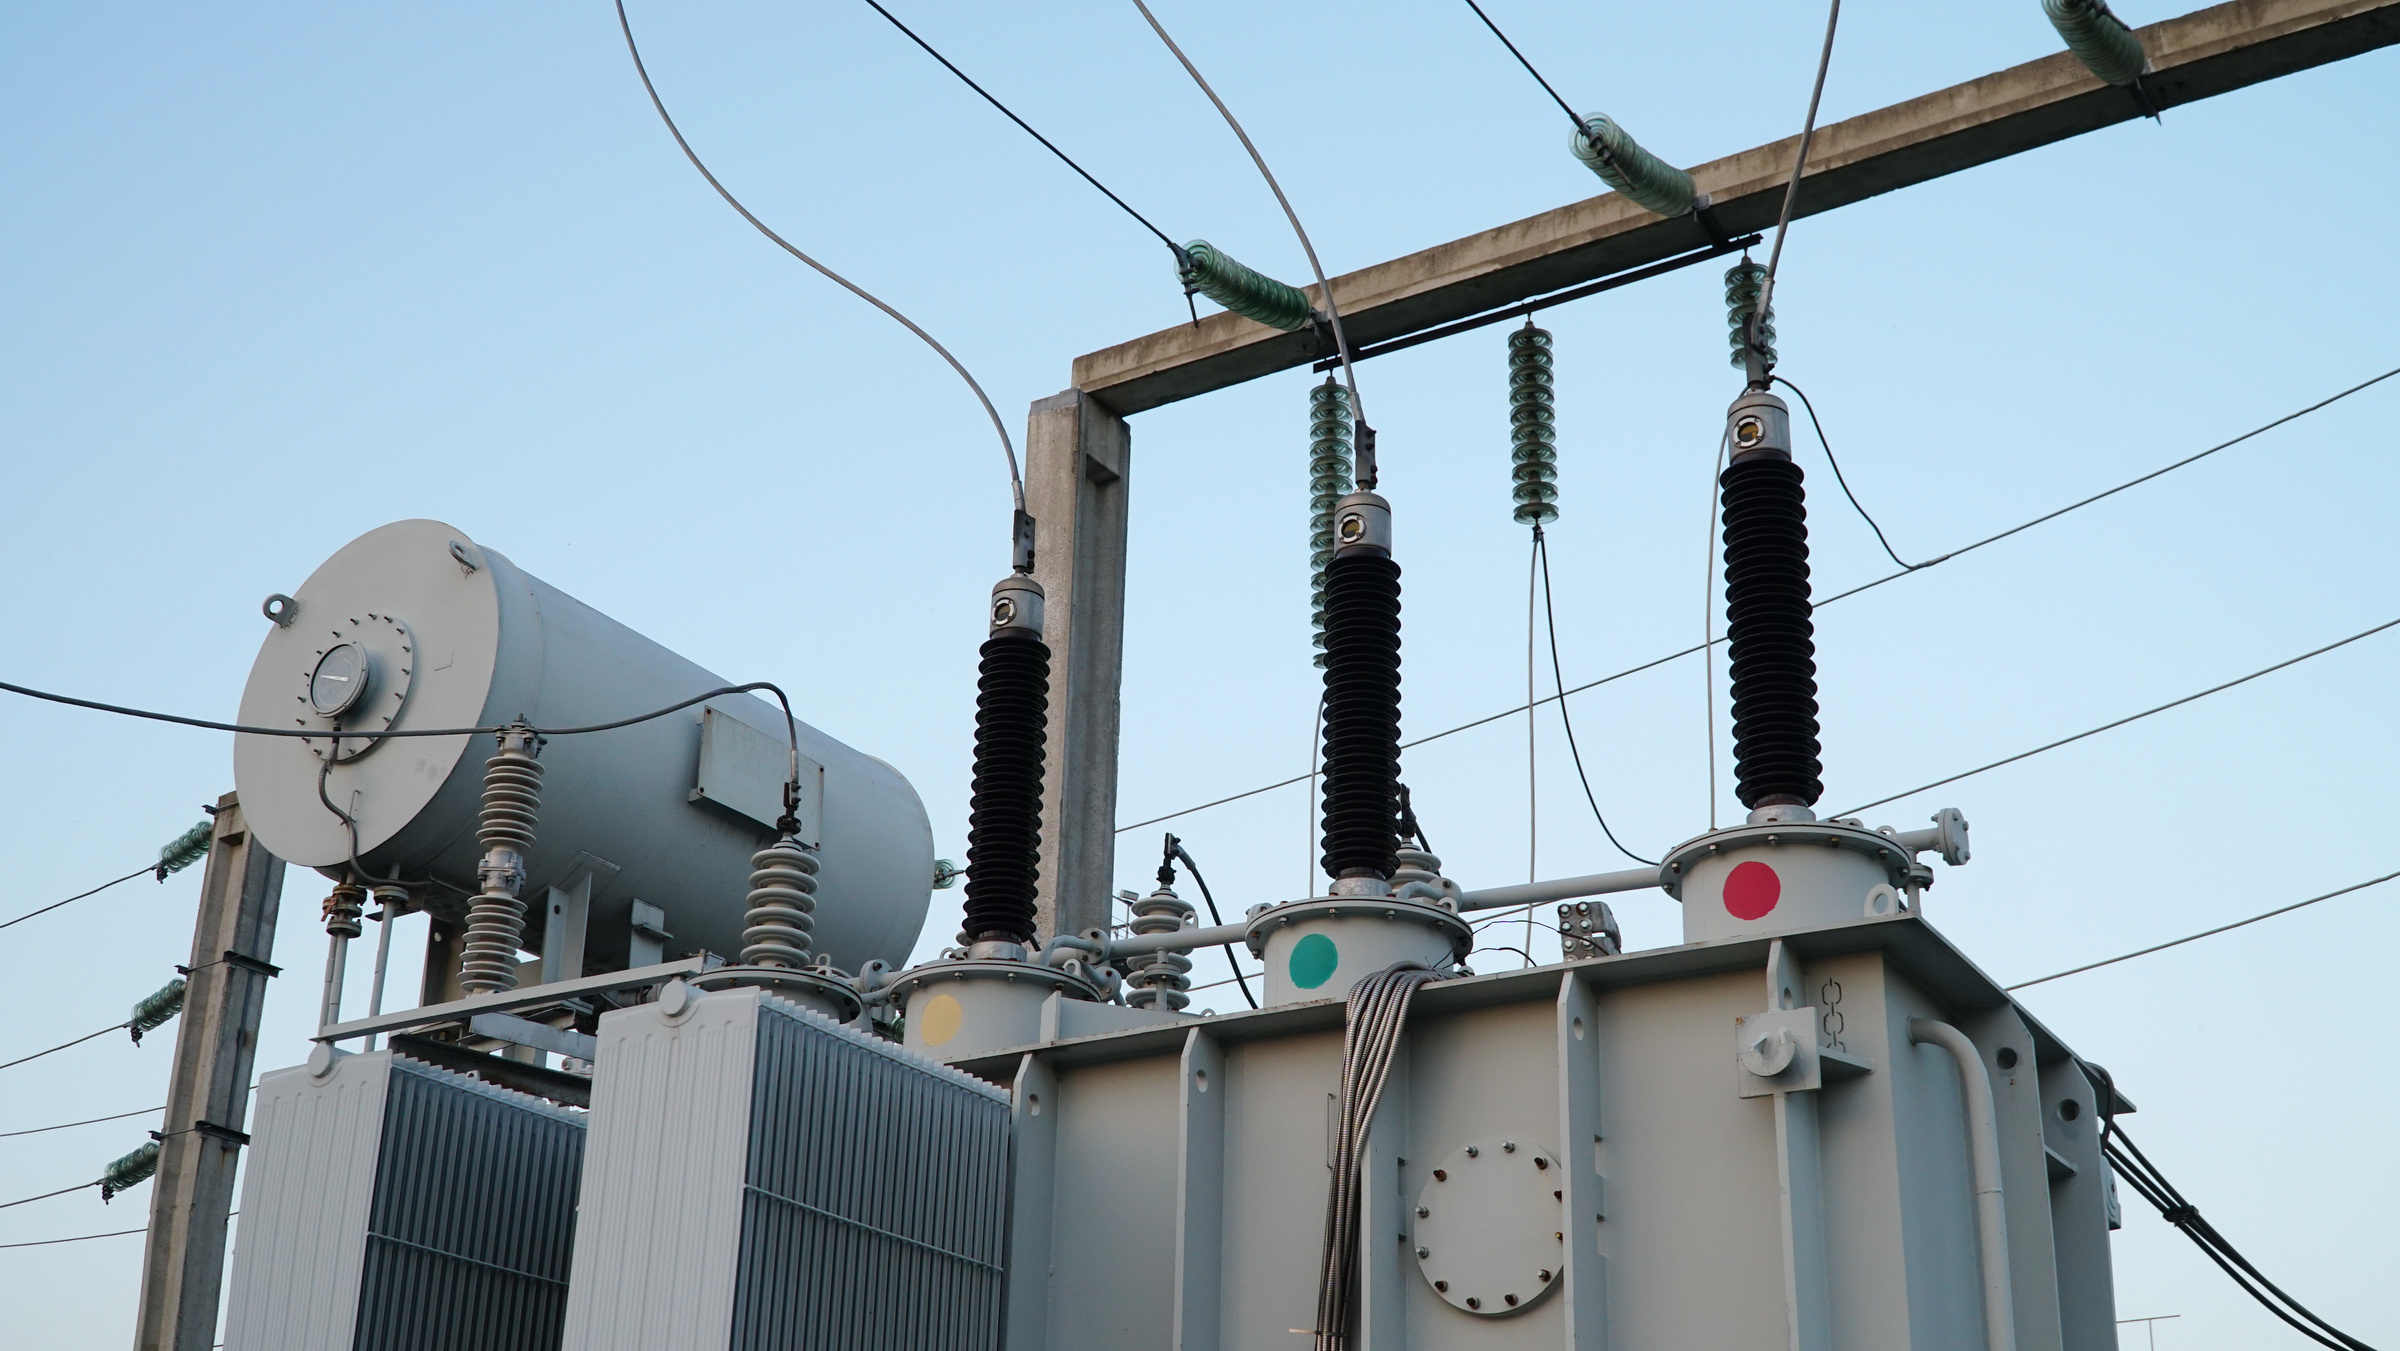 Power transformer. Electrical equipment. Electric substation. High voltage transformer against the blue sky. Electric current redistribution substation